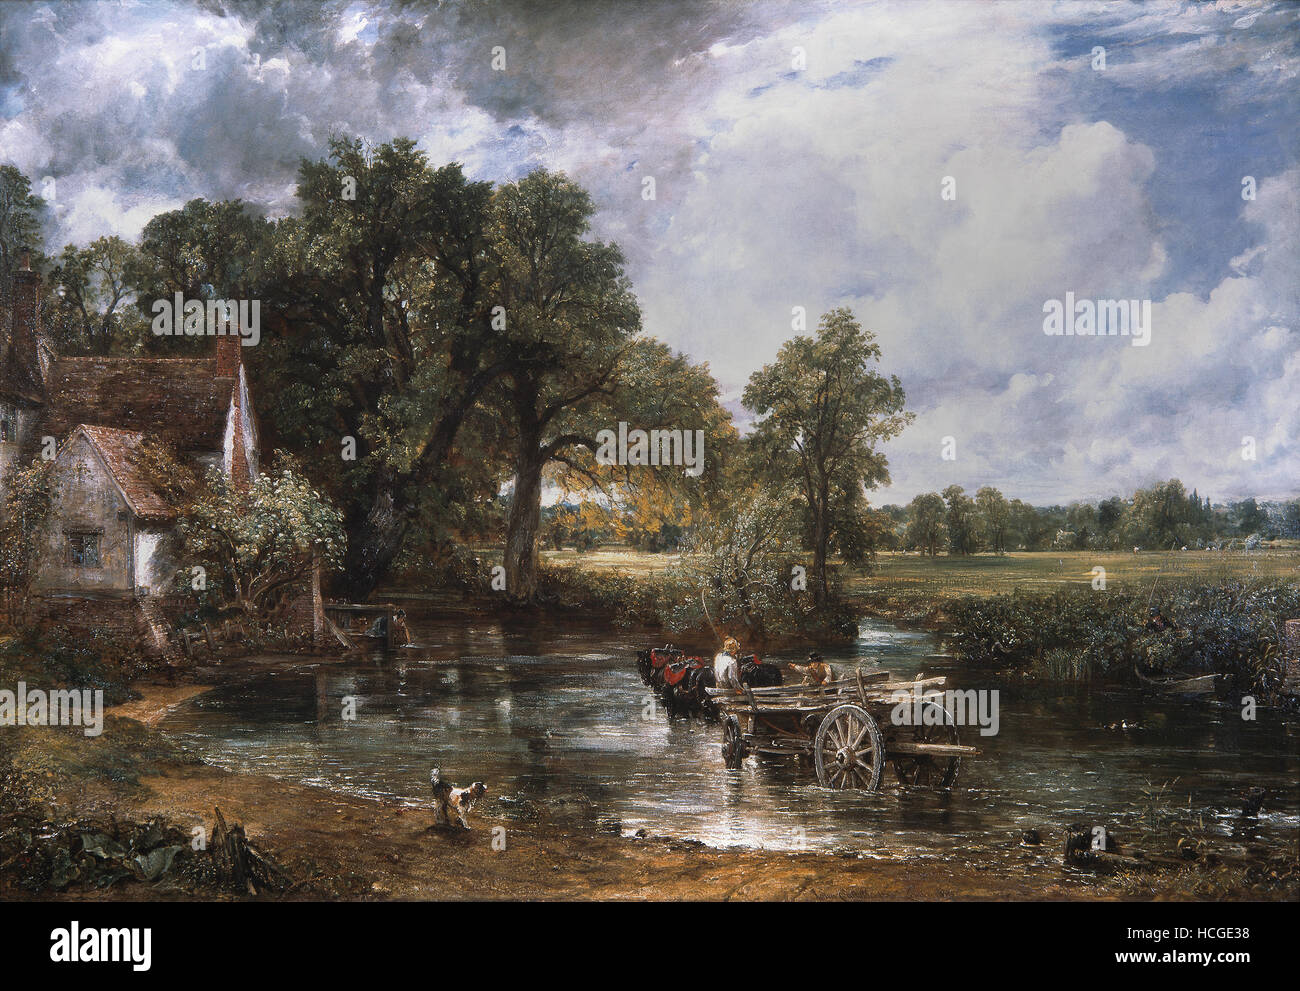 John Constable - The Hay Wain - A cart in Flatford Mill - 1821 Stock Photo